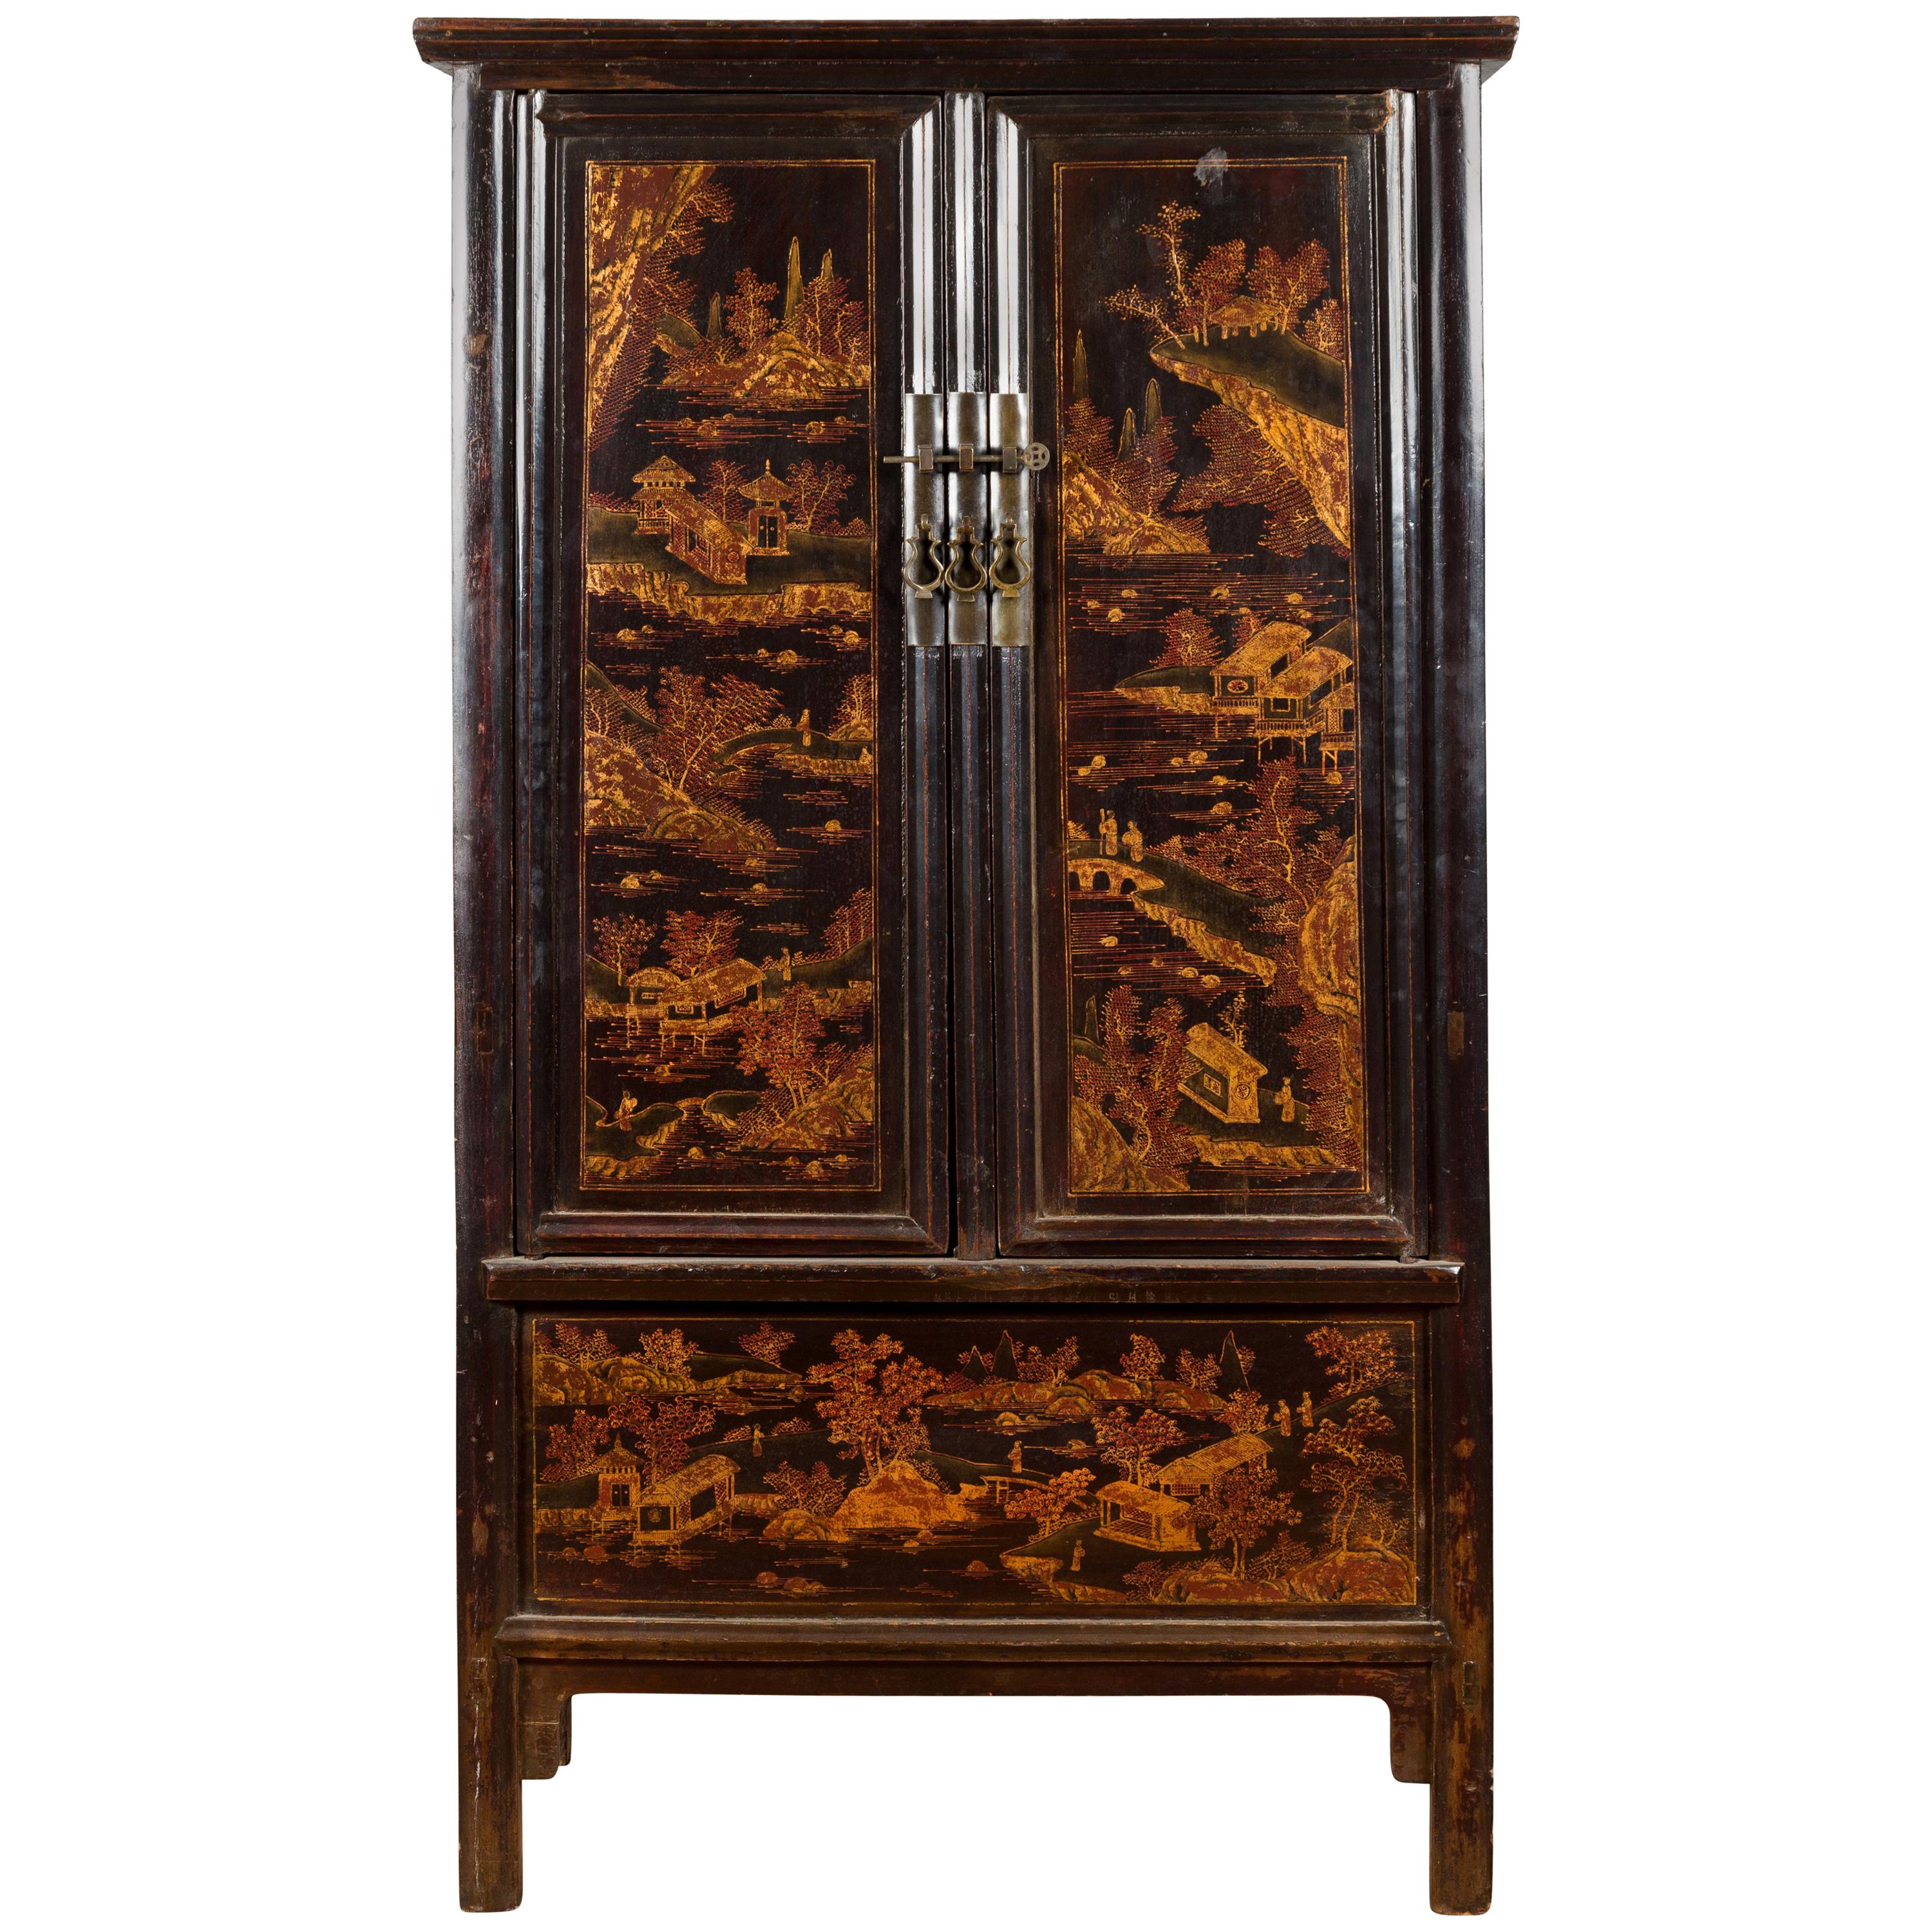 Chinese Qing Dynasty Shanxi Black Lacquer Cabinet with Golden Chinoiserie Décor